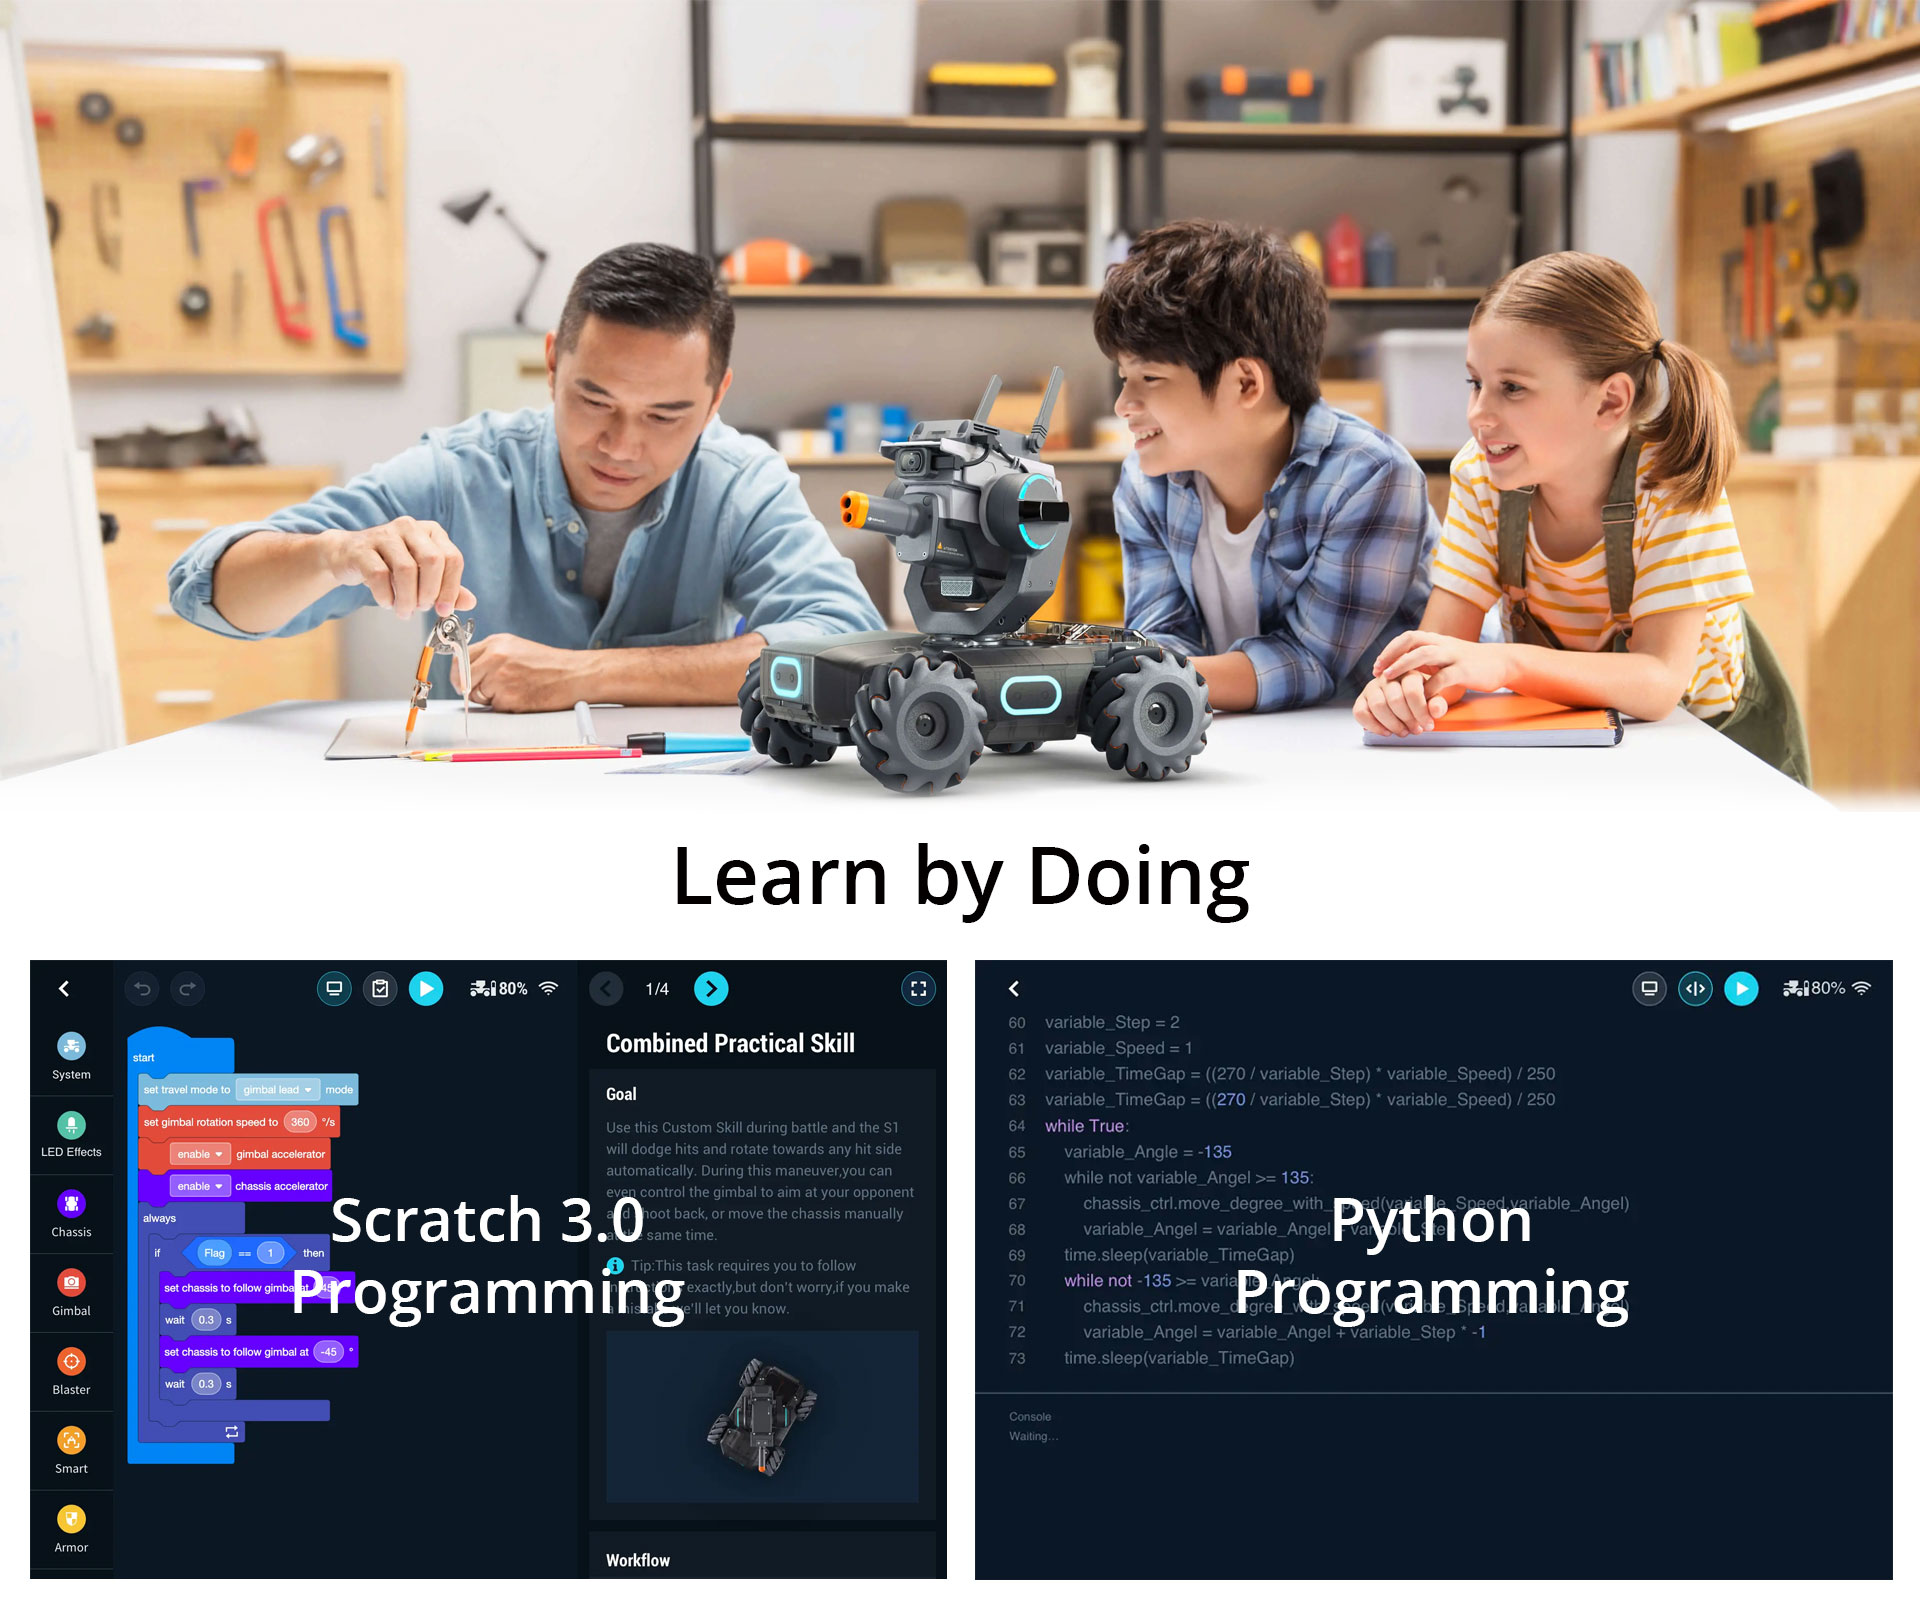 DJI RoboMaster S1 Learn by Doing with Scratch & Python Programming Language